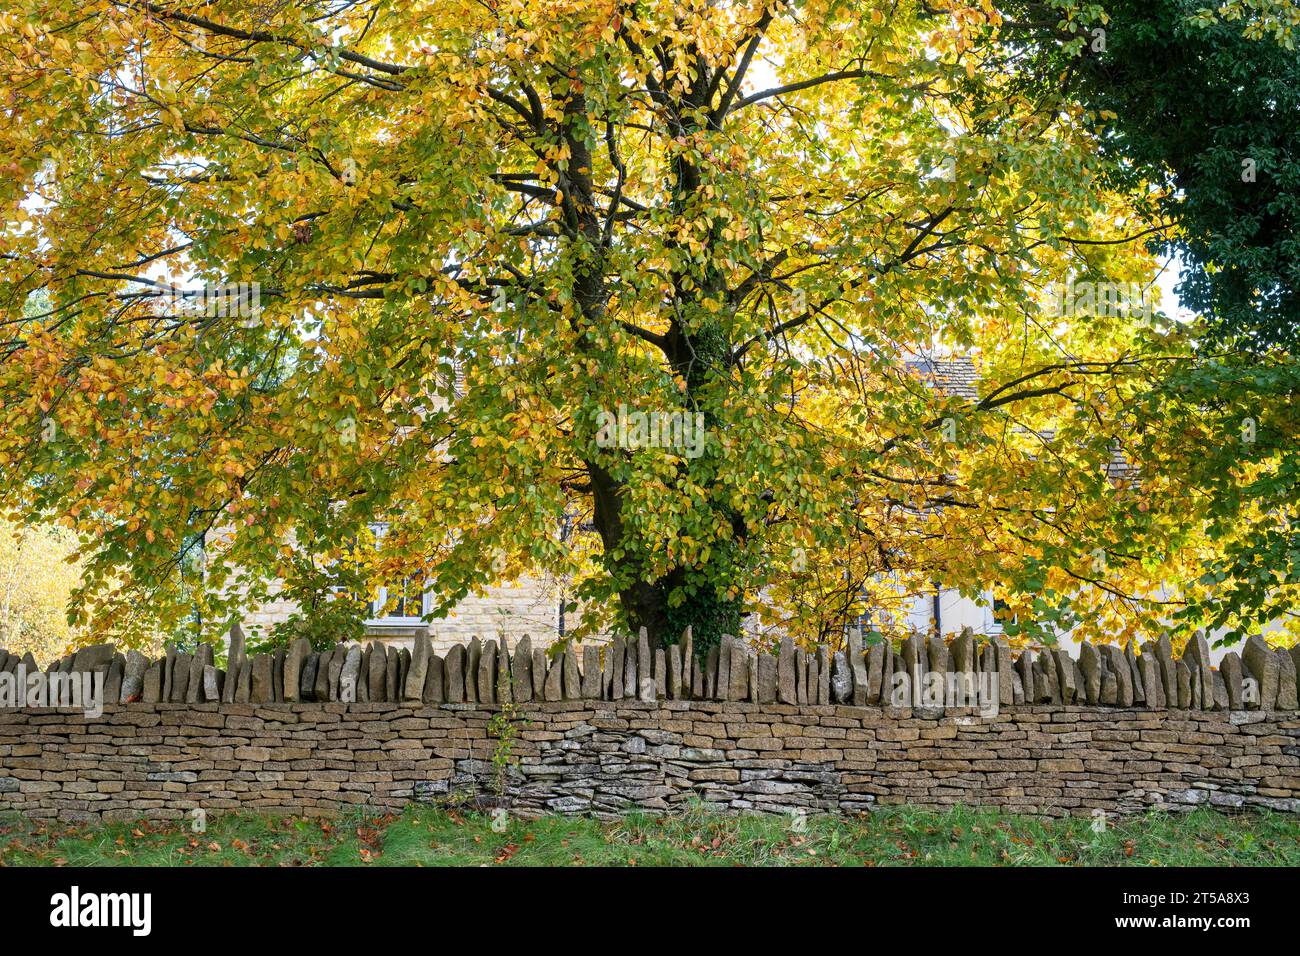 Fagus sylvatica. Autumn Beech tree and cotswold stone wall. Stow on the Wold, Cotswolds, Gloucestershire, England Stock Photo